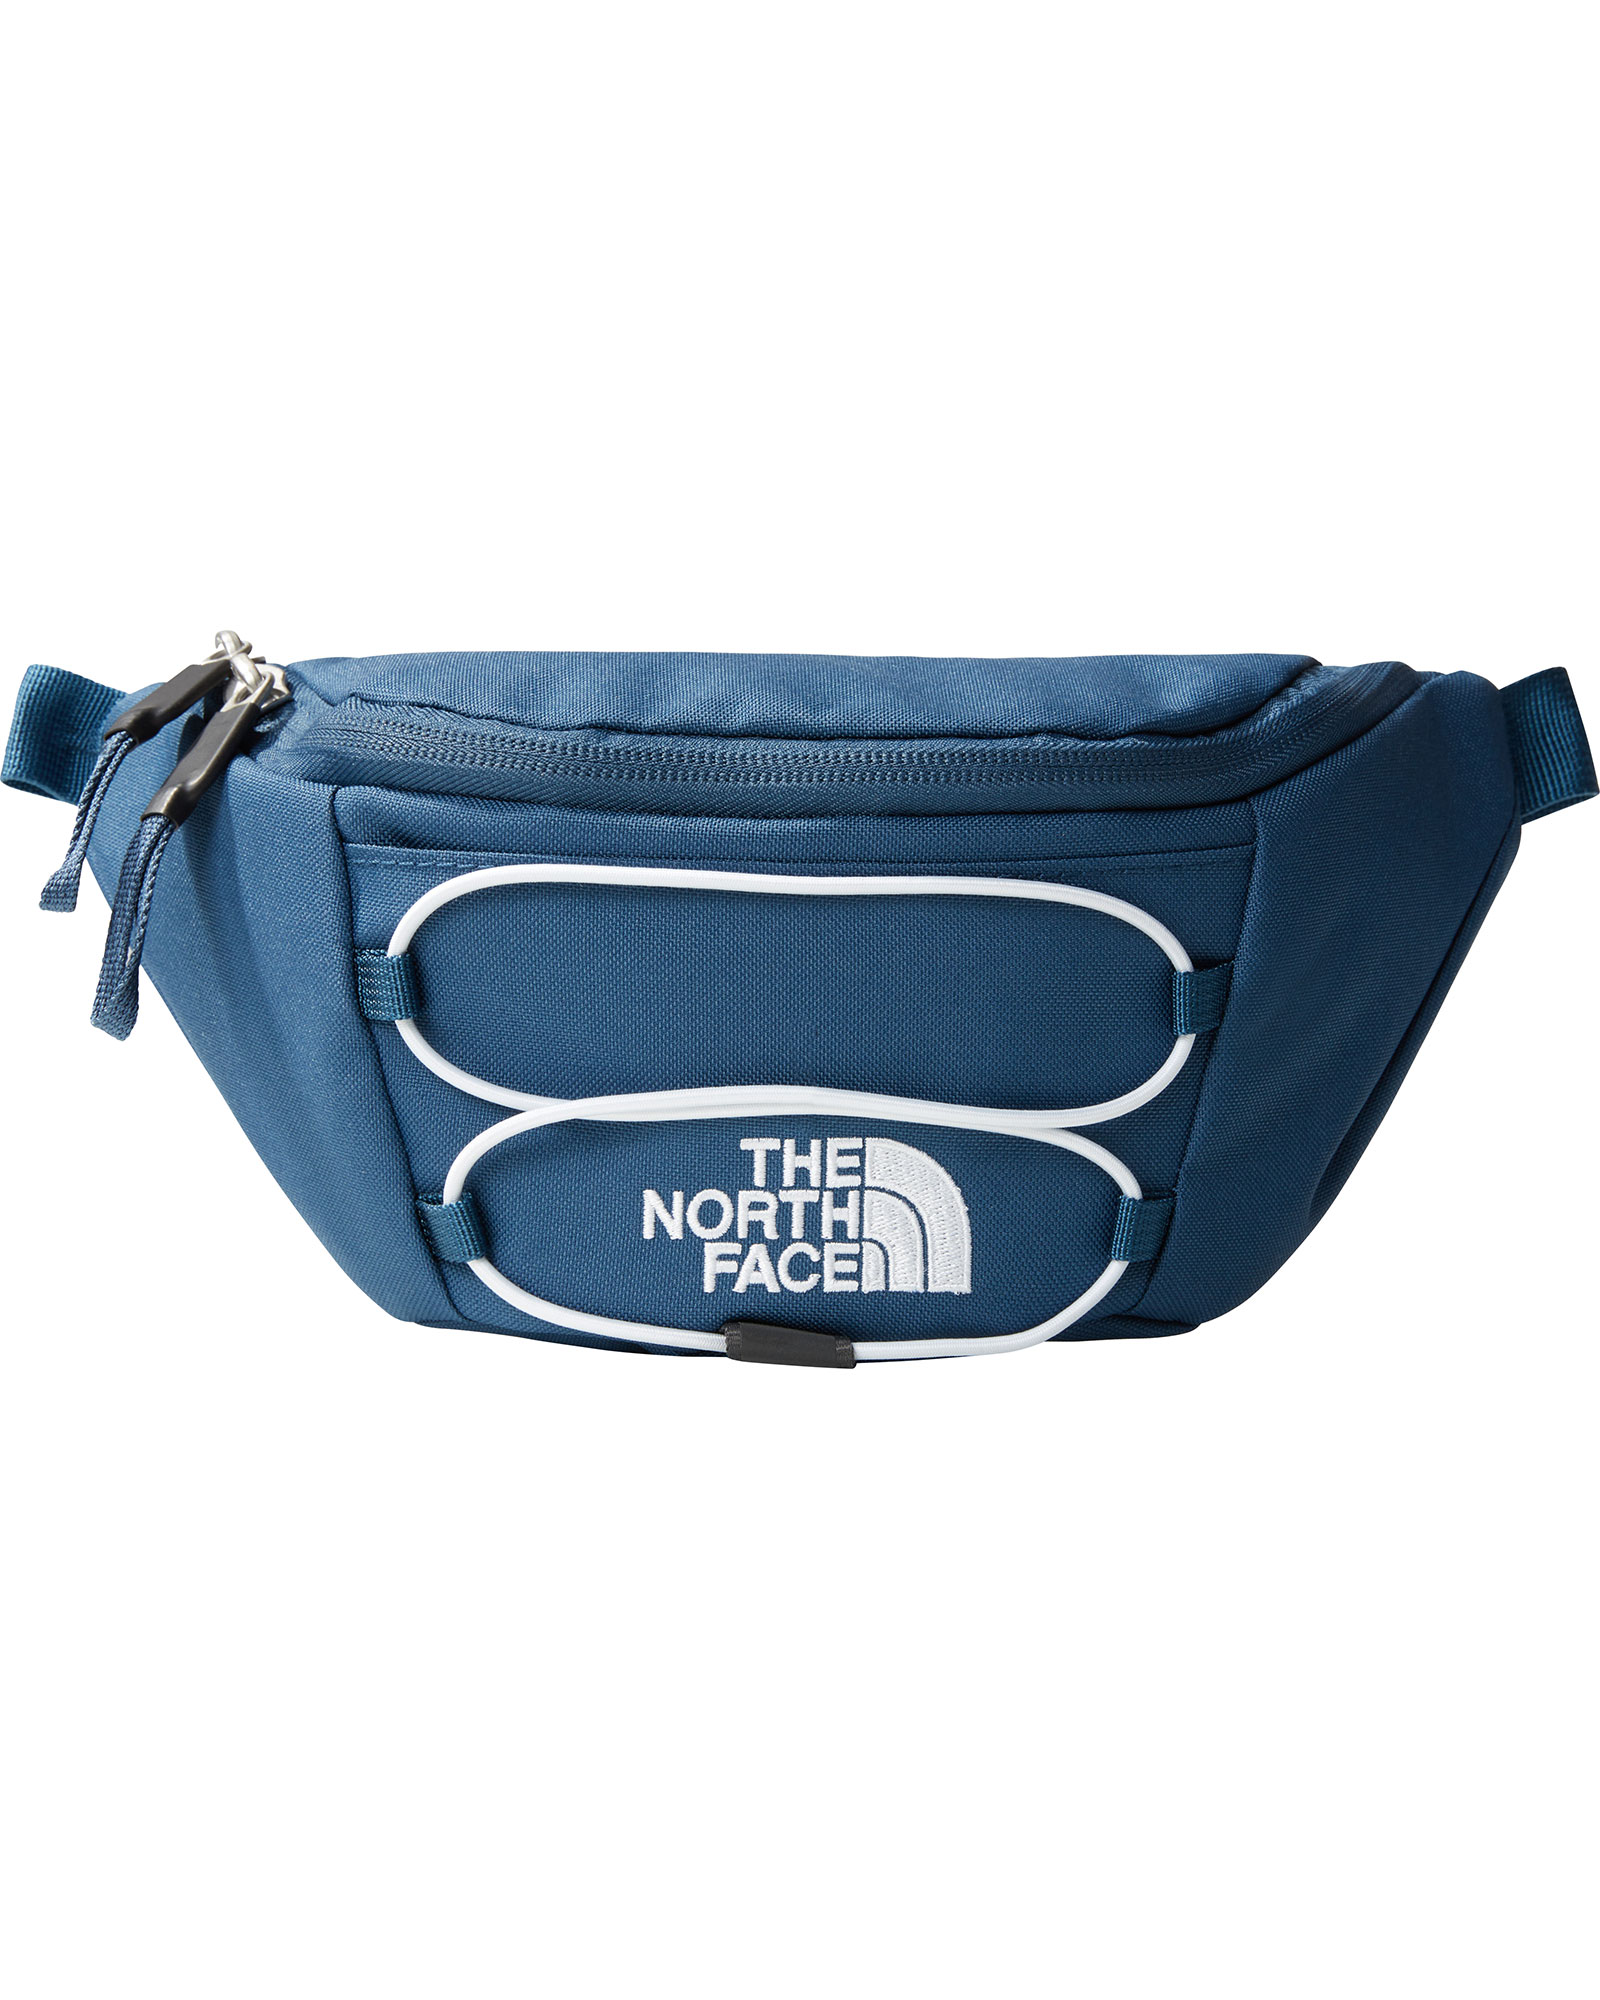 The North Face Jester Lumbar Bag - Shady Blue/TNF White